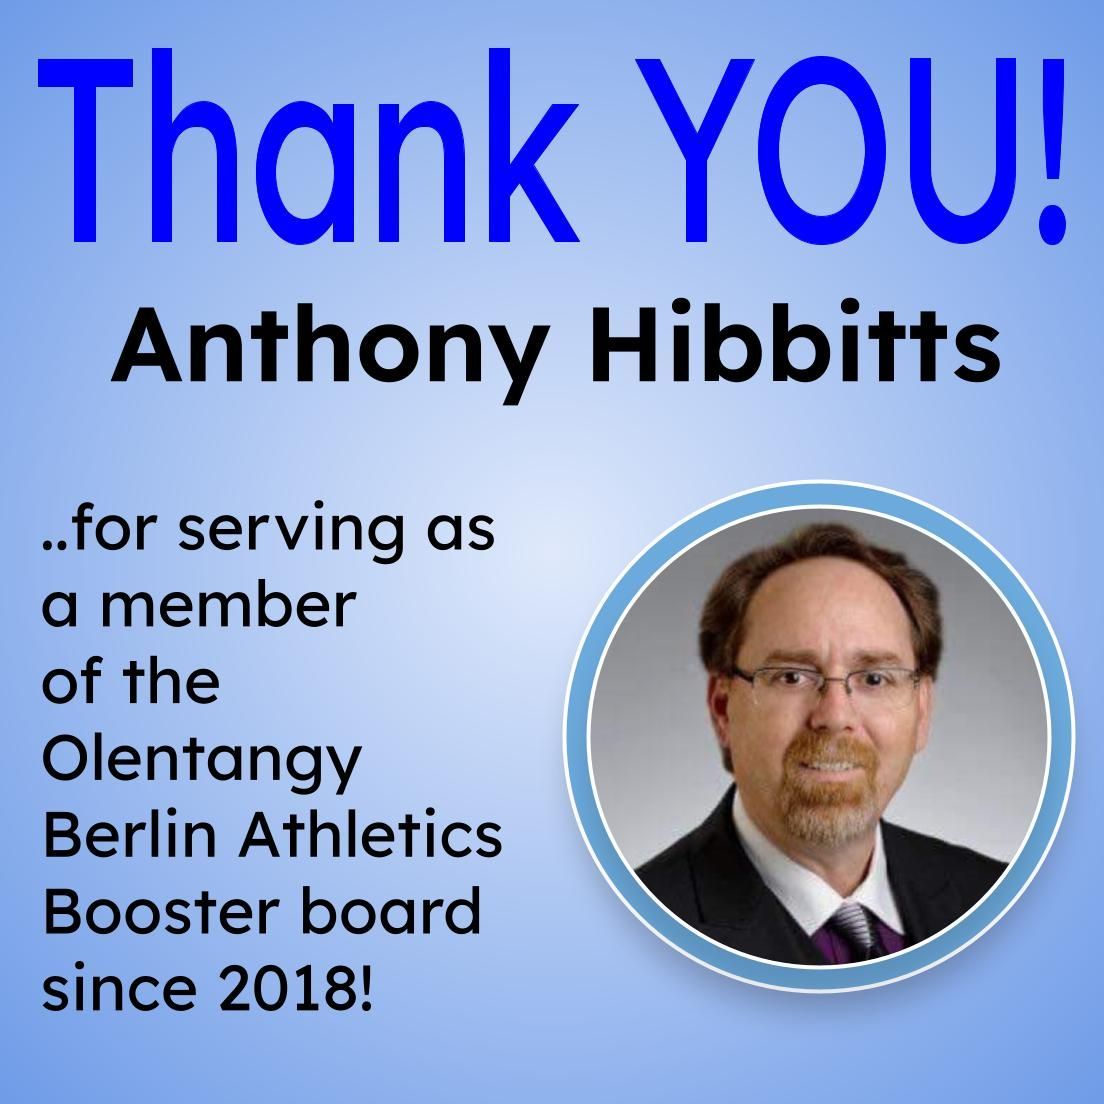 We are saying goodbye to some of the original members of the OBAB executive board. We want to express our heartfelt gratitude to Anthony, who has served as an executive board member since the board was established in 2018 with the school opening. Berlin Pride … It’s Forever!